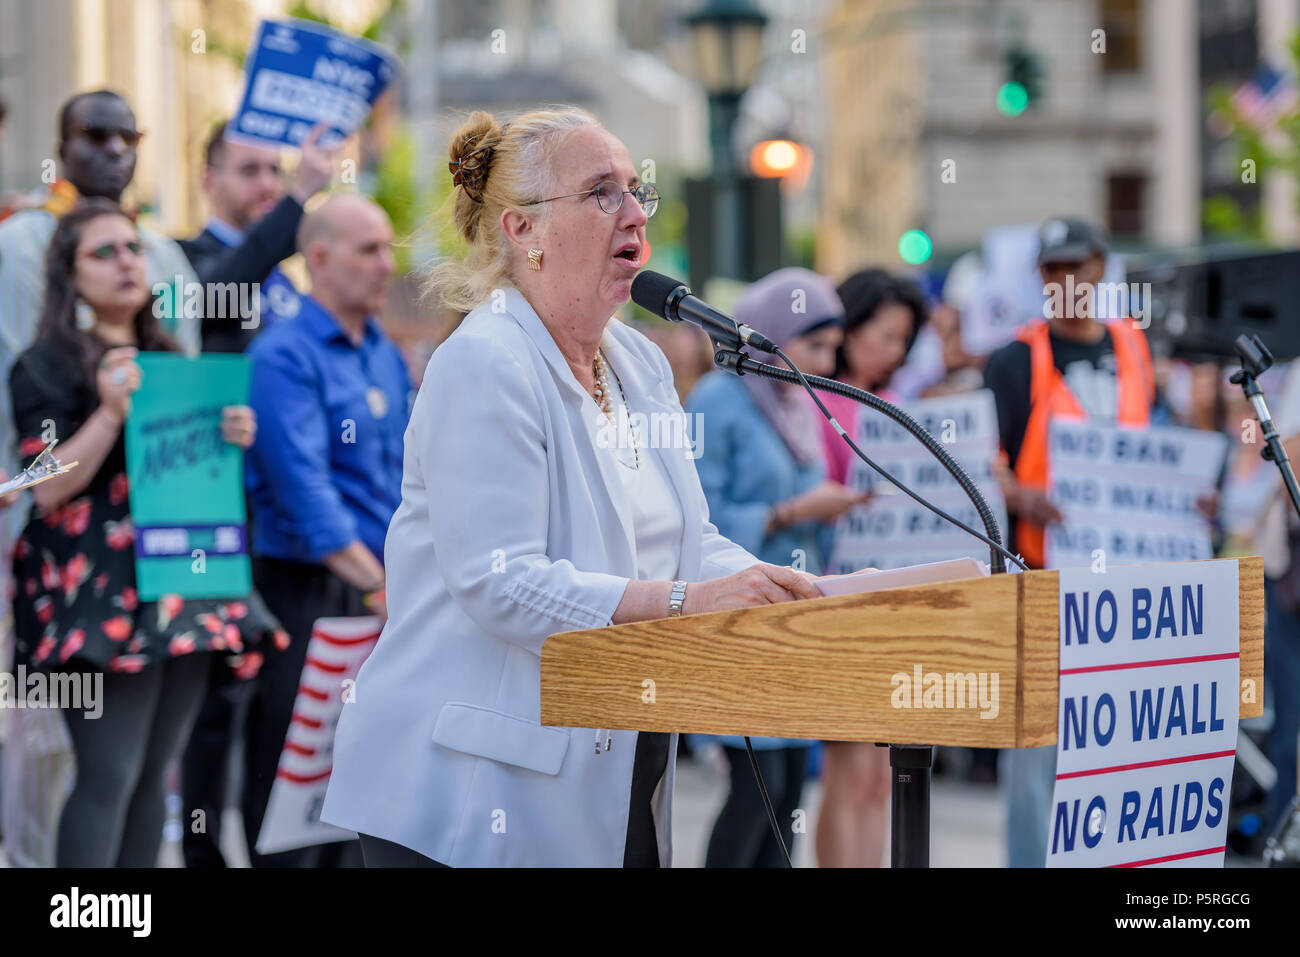 New York, United States. 26th June, 2018. Manhattan Borough President Gale Brewer - Over a thousand New Yorkers and immigration rights community organizations gathered at Foley Square in lower Manhattan on June 26, 2018, to rally against the Supreme Court decision announced this morning to uphold the Muslim Ban. The Asian American Federation is calling on its member agencies, advocates and community leaders, allies, and elected officials to stand together in solidarity. Credit: Erik McGregor/Pacific Press/Alamy Live News Stock Photo